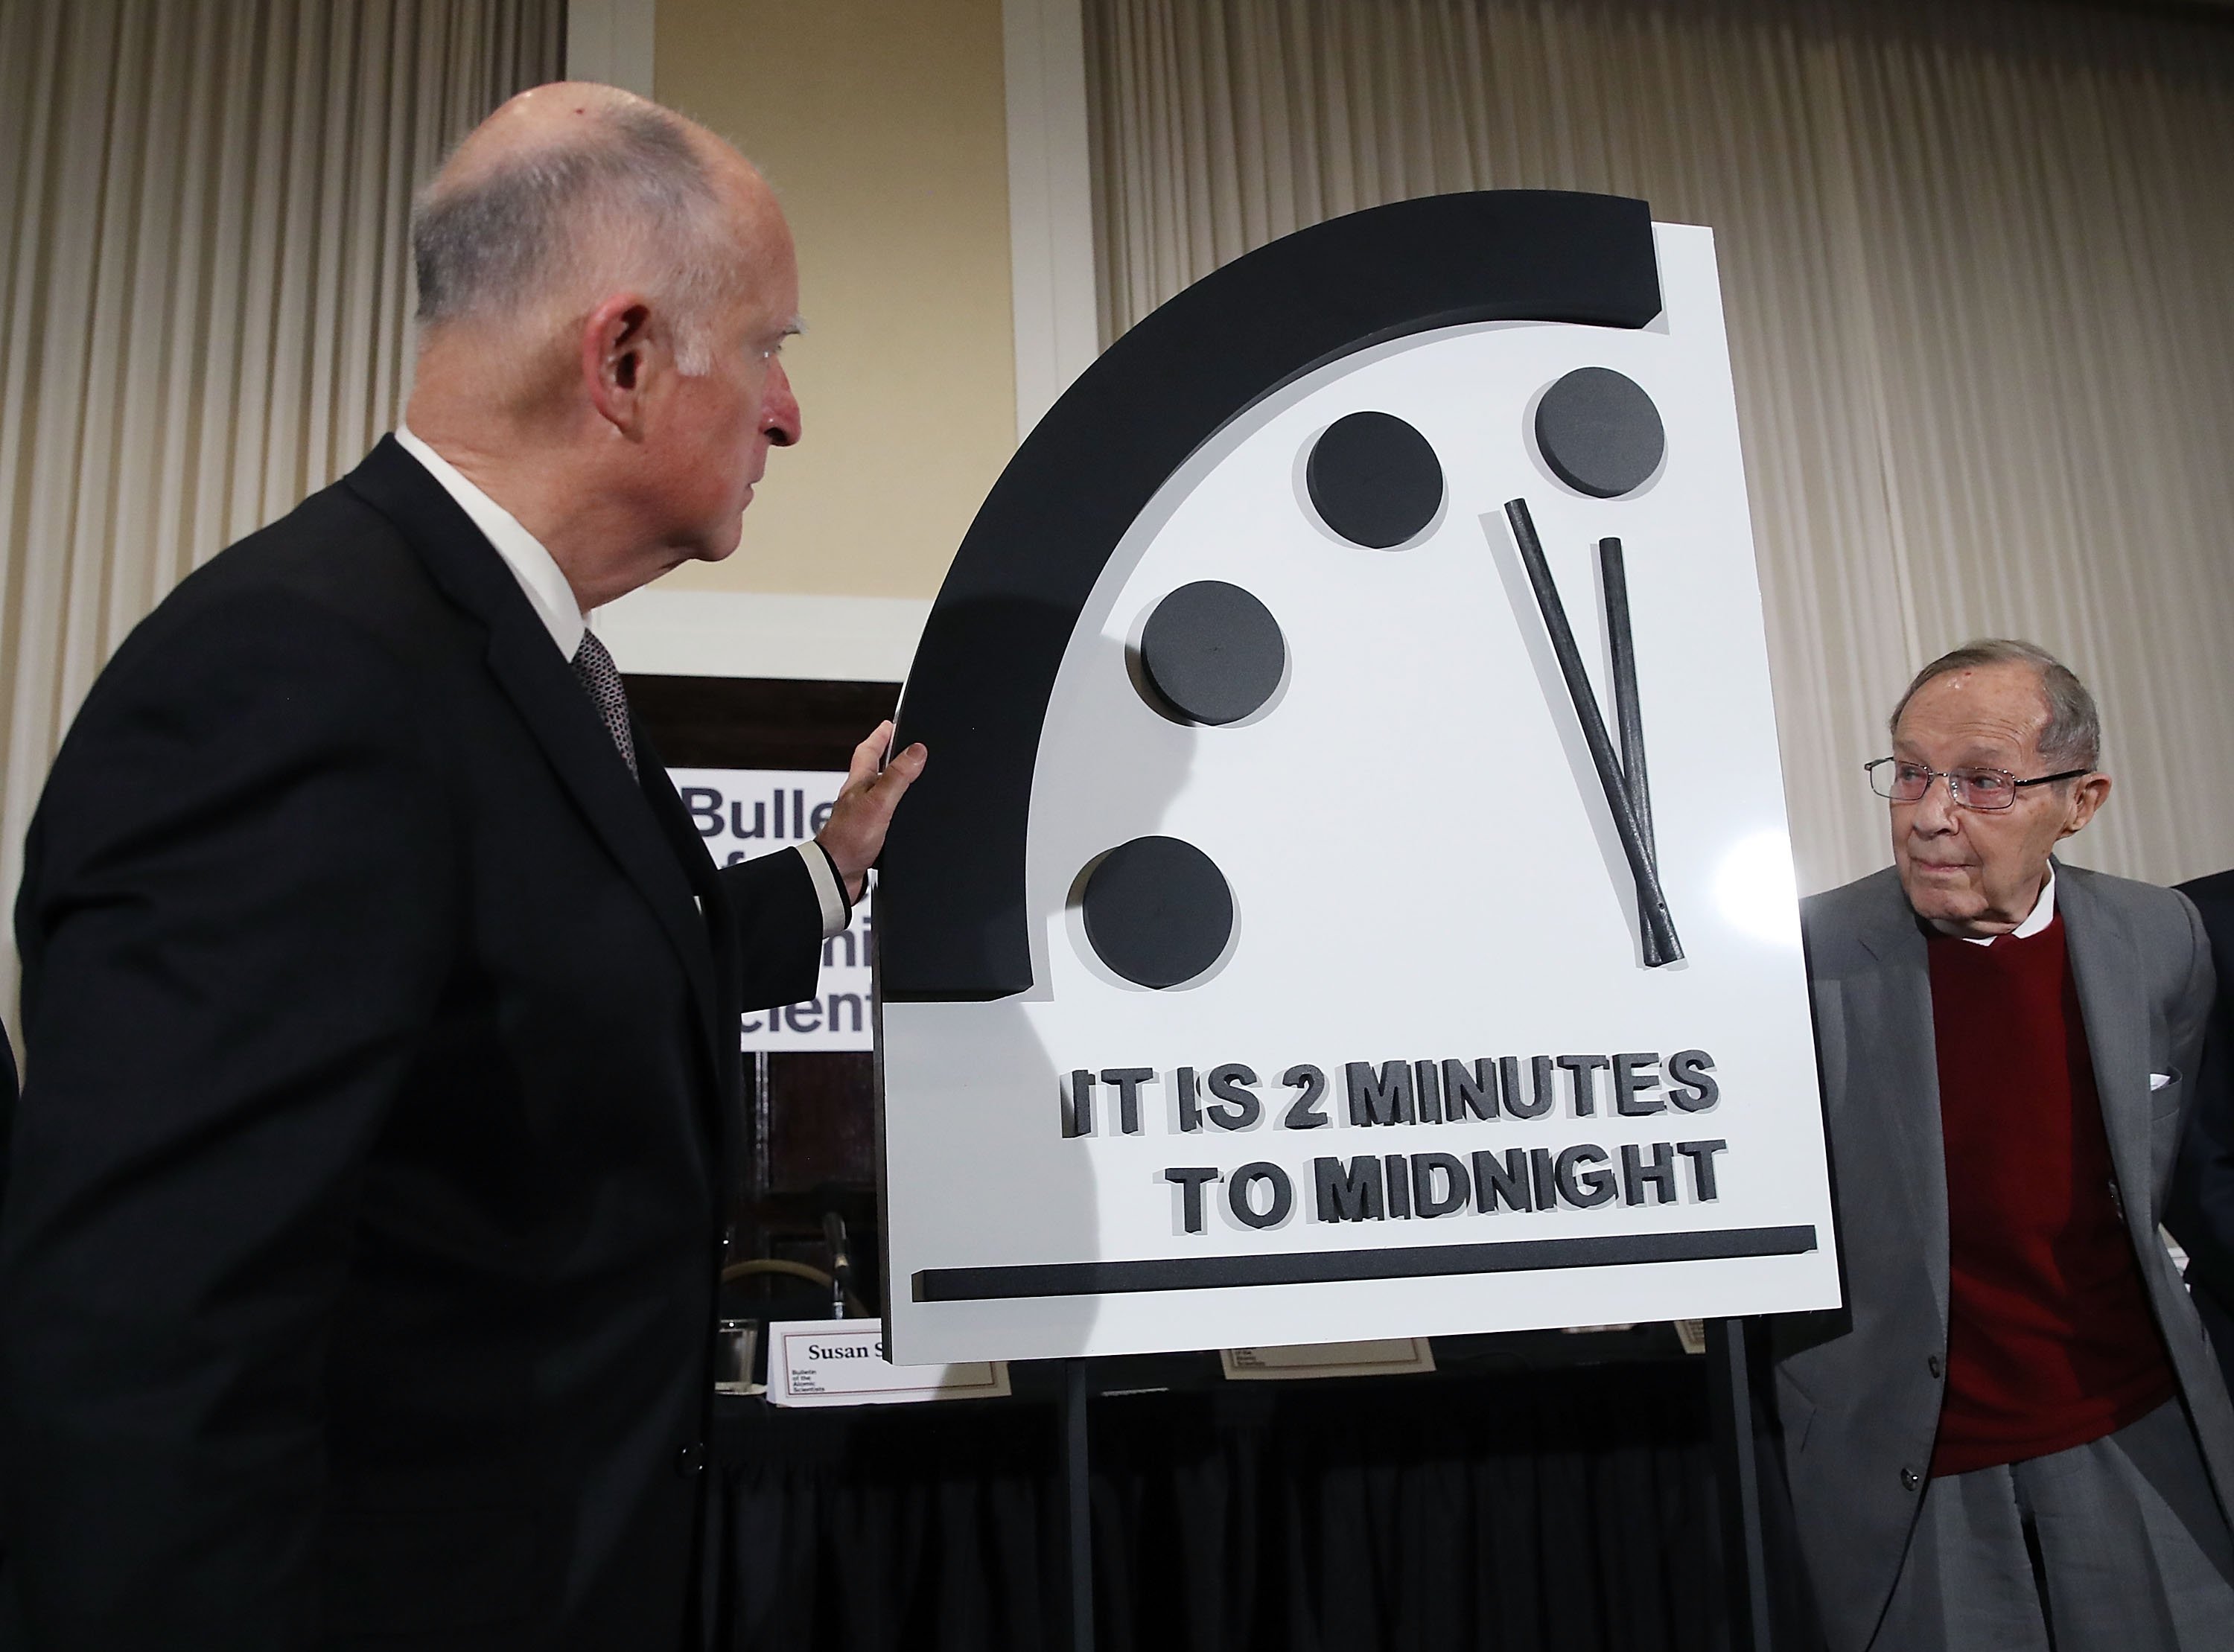 The Doomsday Clock is being reset Thursday, letting humanity know if we've inched any closer to the complete and total annihilation of the earth (well, at least metaphorically).